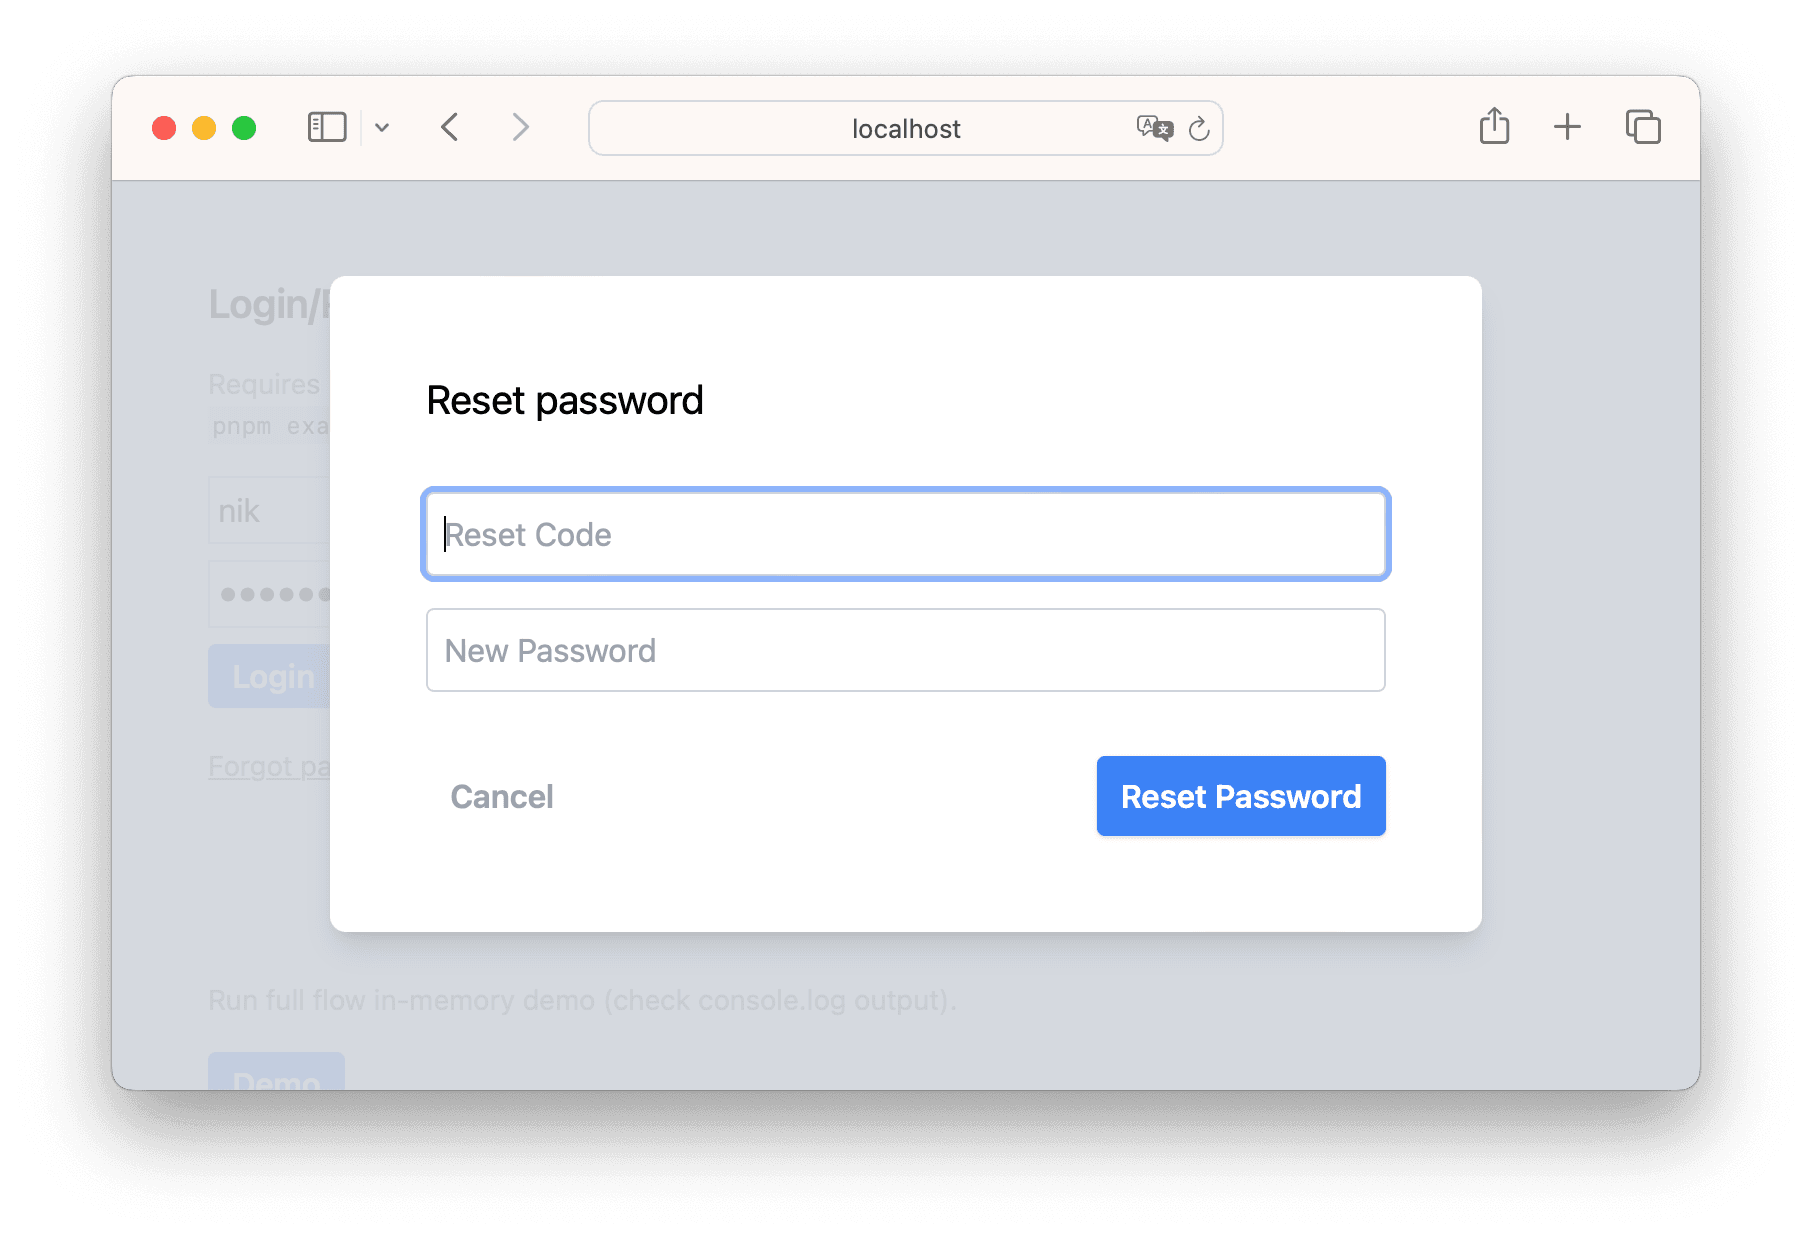 Screenshot of the Reset Password form showing a reset code and new password input field